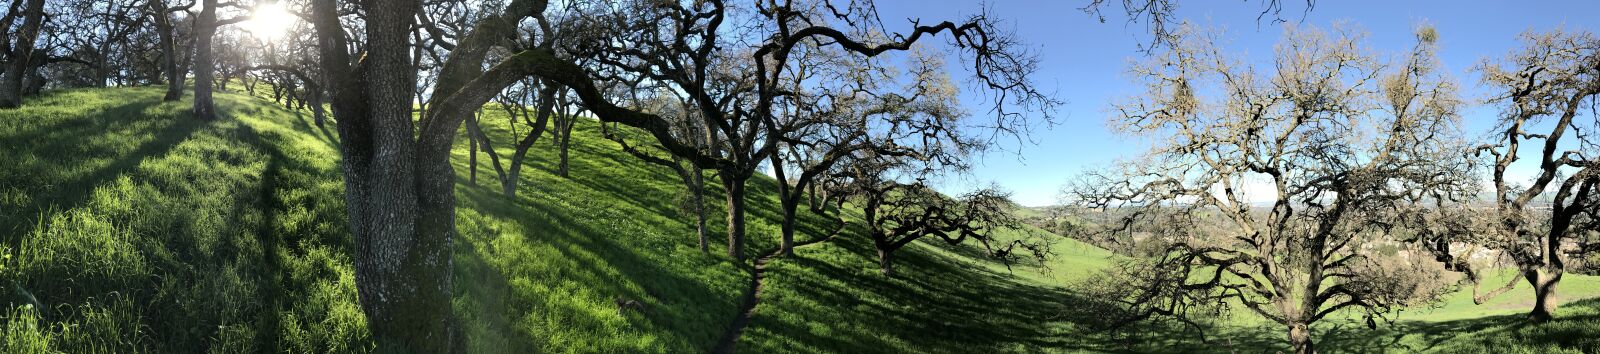 iPhone 7 Plus back camera 3.99mm f/1.8 sample photo. East bay, trees, hills photography